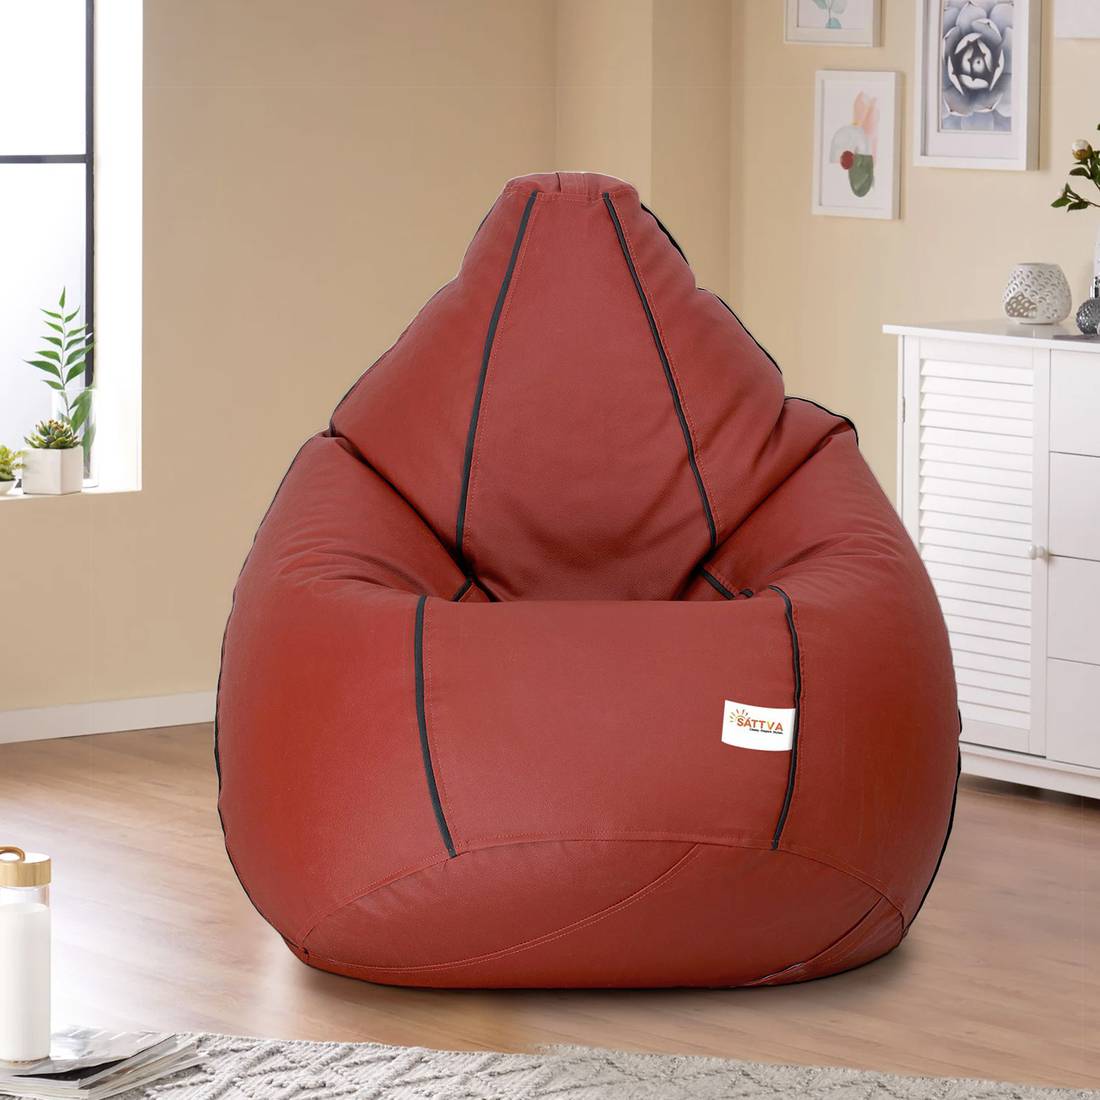 GIGLICK 3XL Filled with Beans Faux Leather Bean Bag with Footrest Color  Orange  Bean Bag with Beans Filled XXXL  Amazonin Home  Kitchen